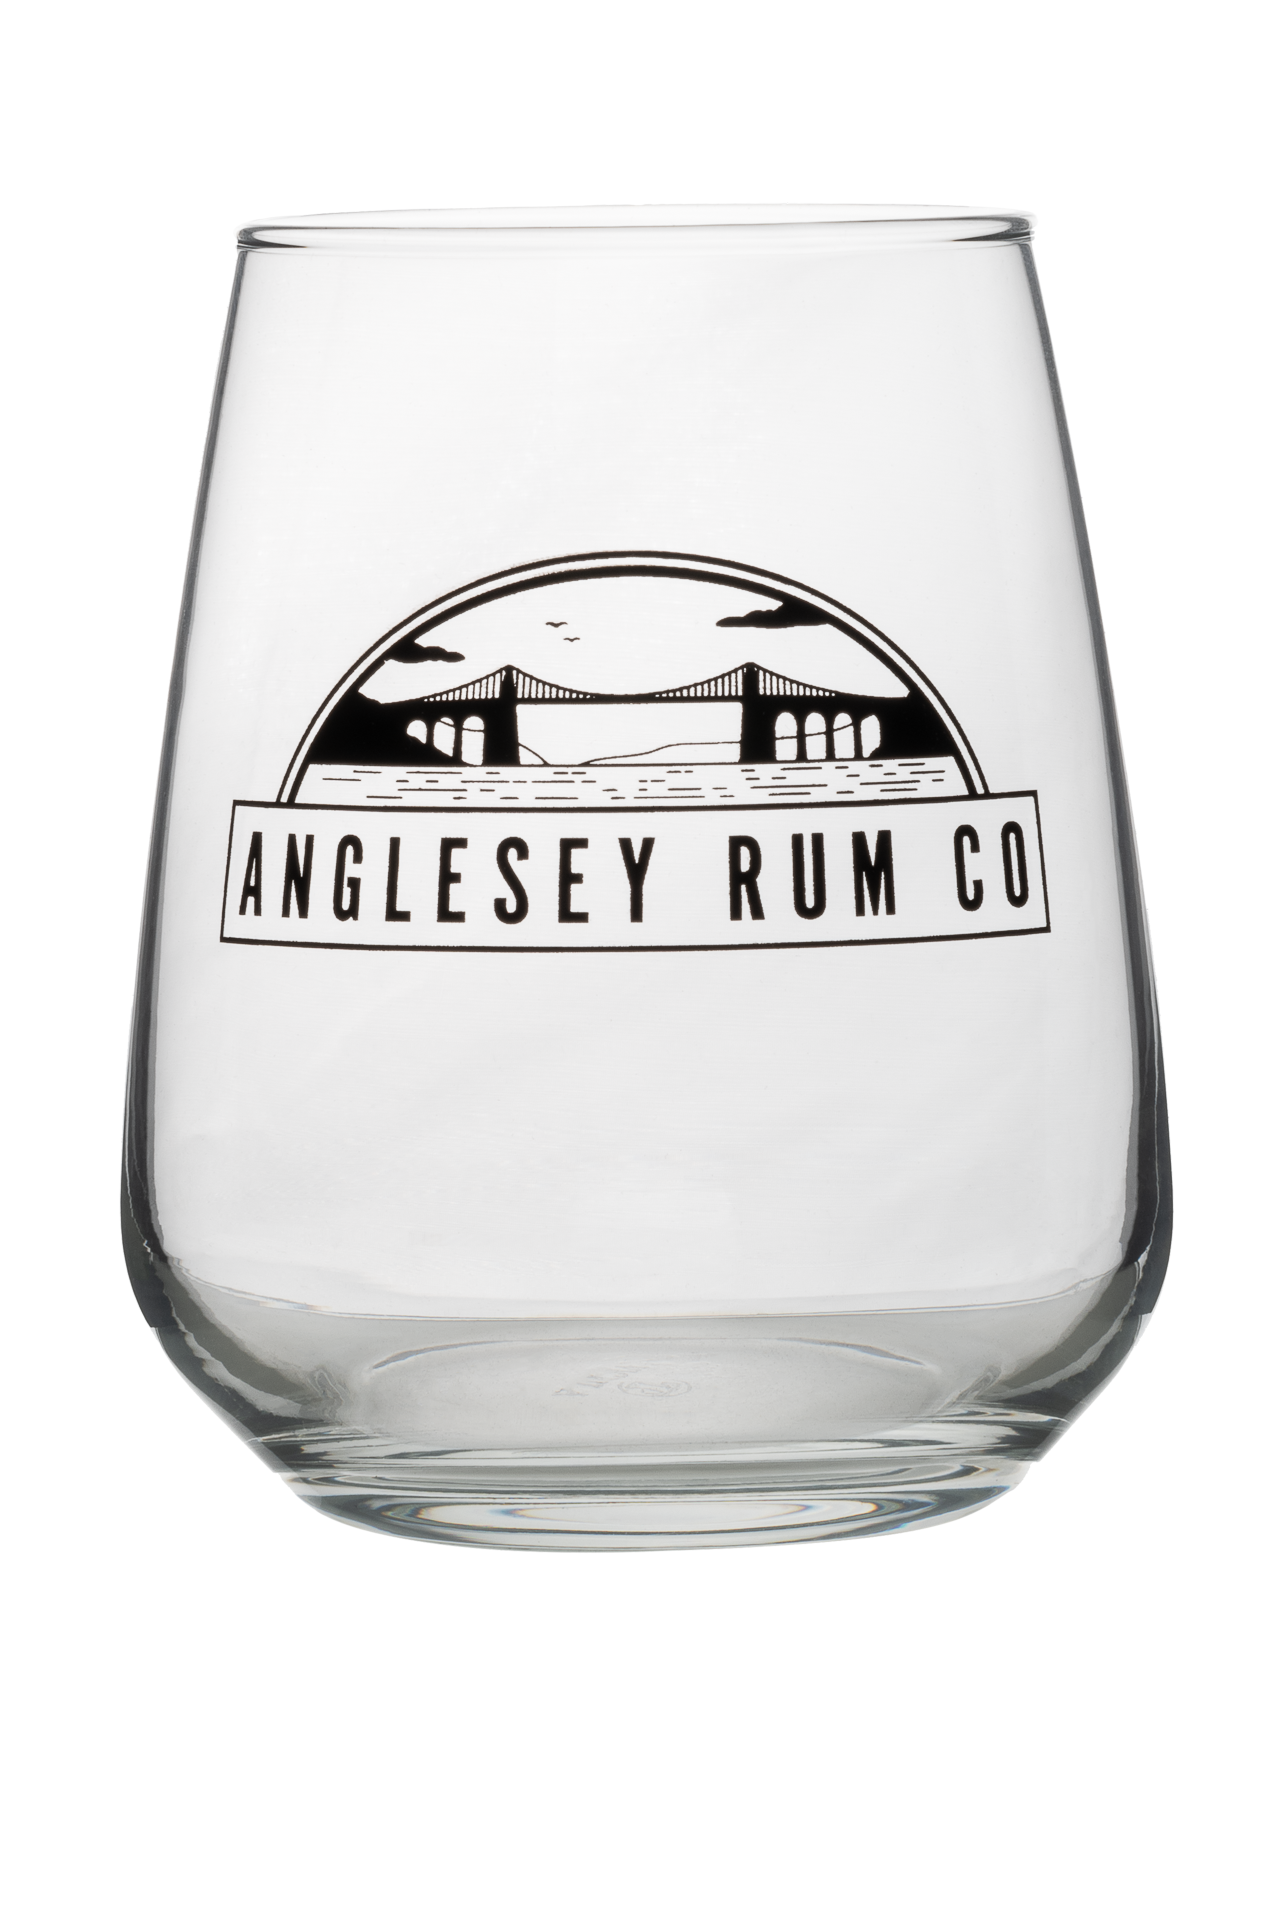 Anglesey Rum Co Branded Glass- Craft Rum from Anglesey Wales